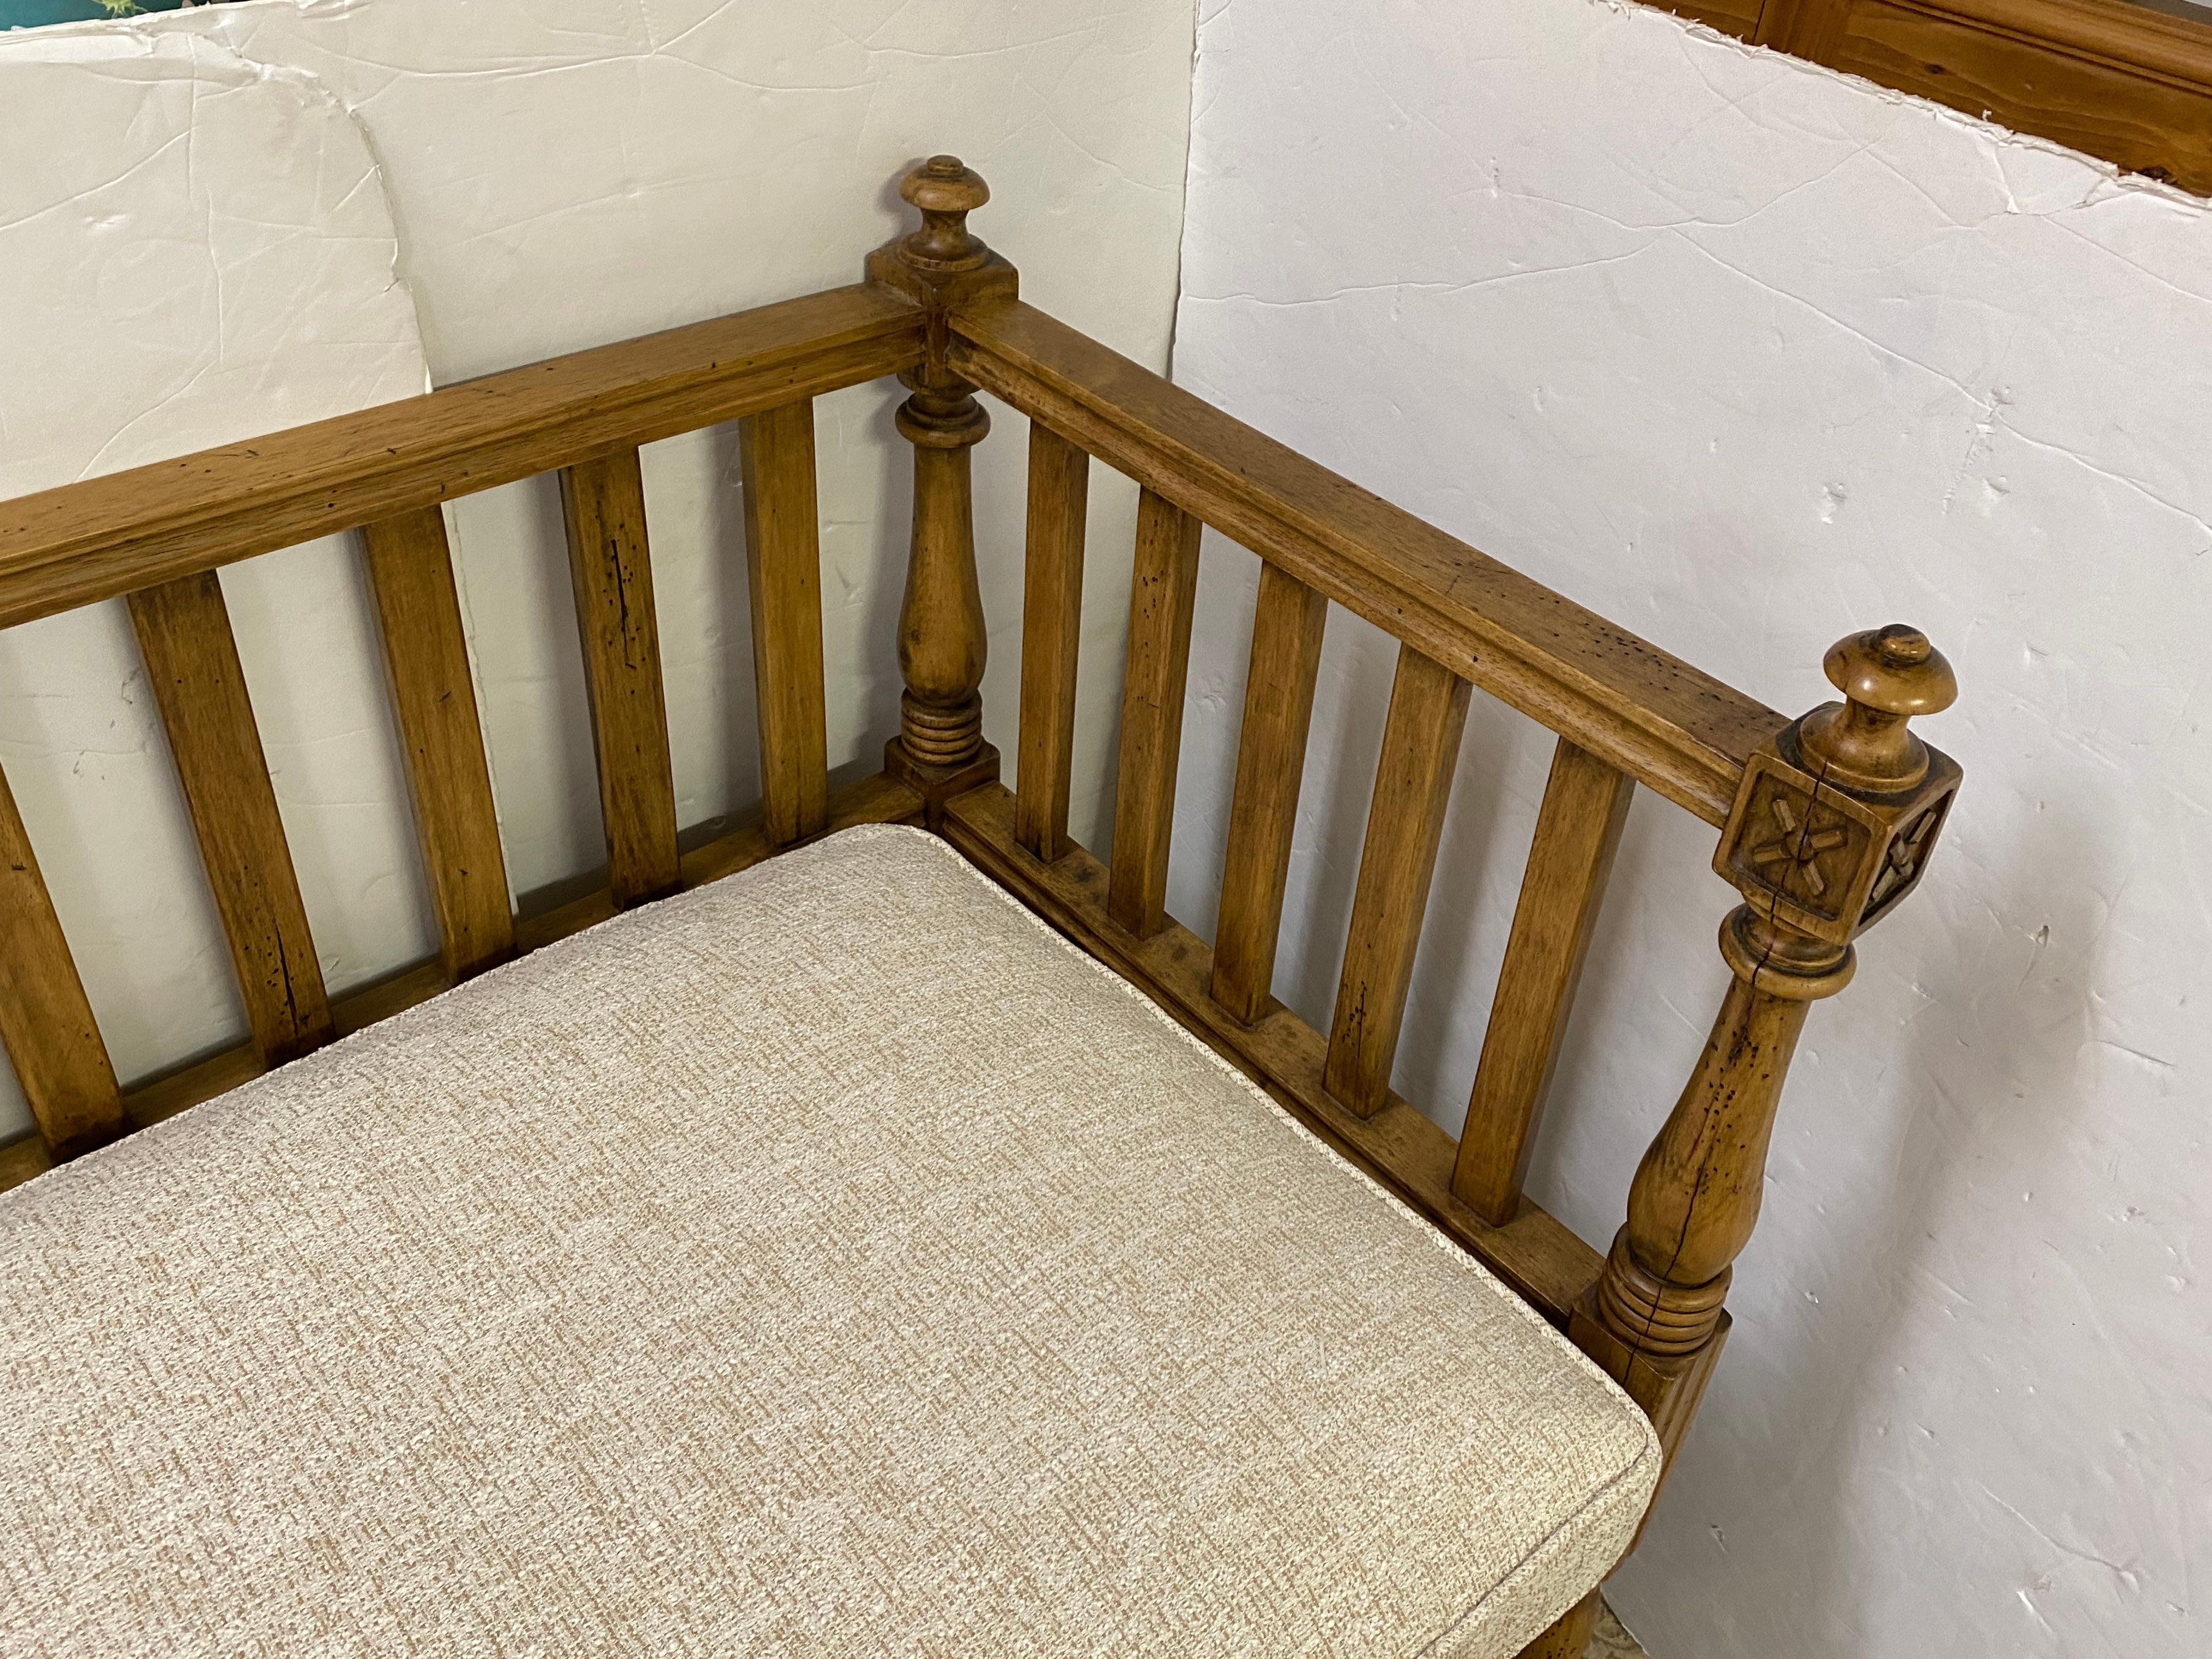 Large handsome oak bench in the Arts & Crafts style having squared off frame with back splats, turned legs, and 4 decorative finials.  Seat cushion has just been wrapped with new polyfill and cushion cover with a neutral  Crypton fabric, so it will